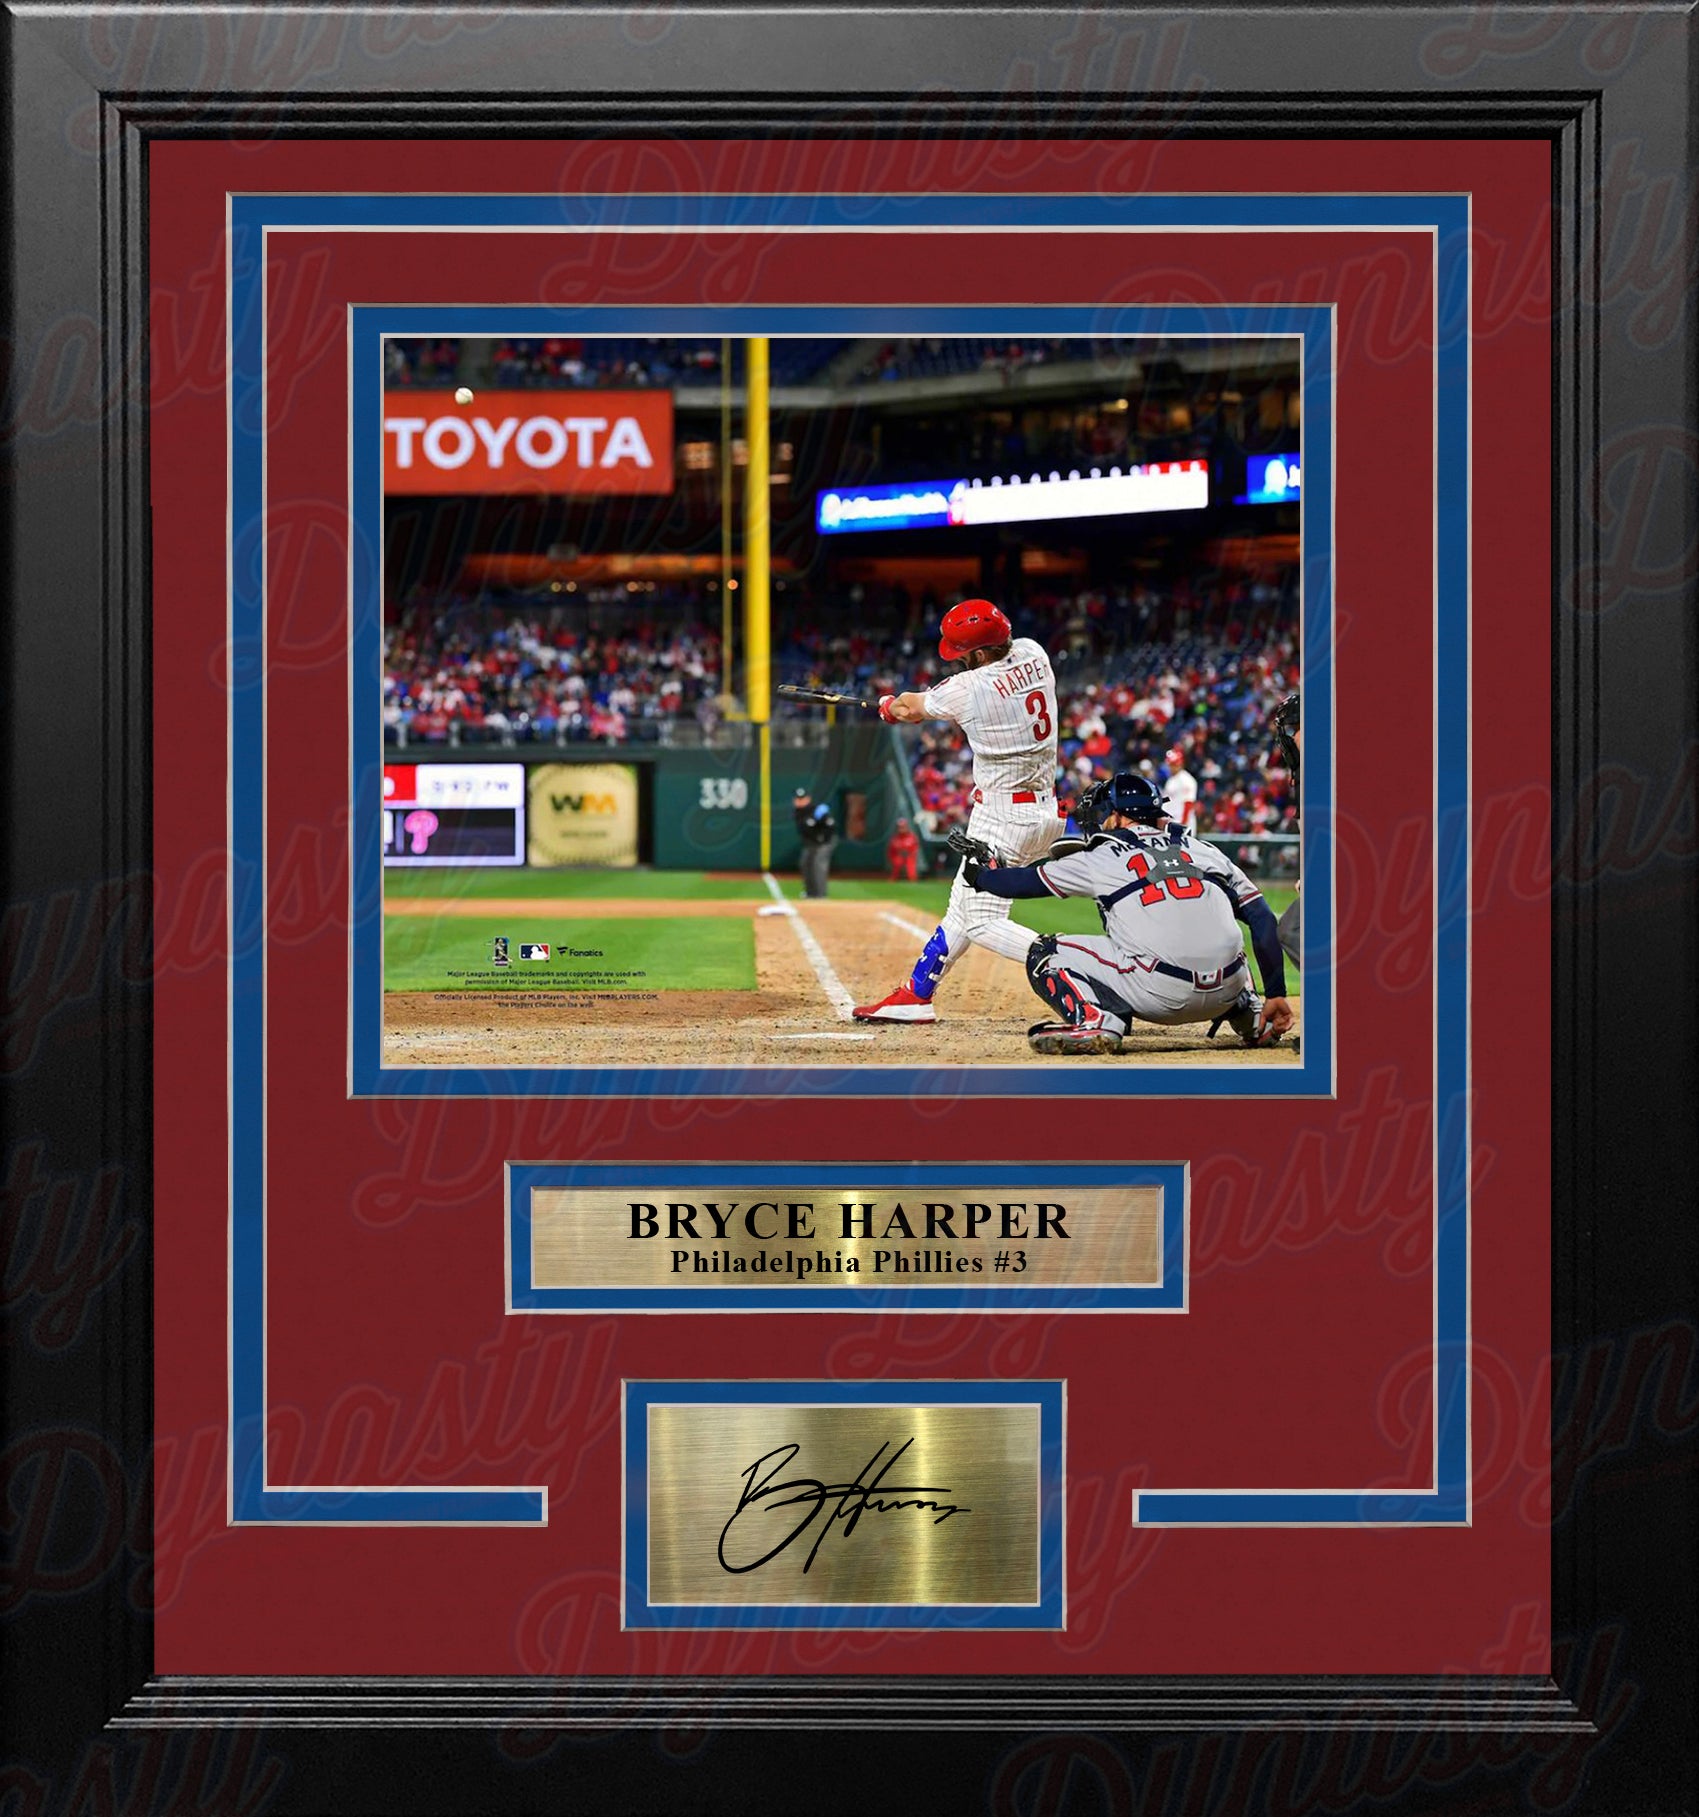 Bryce Harper Home Run Swing Philadelphia Phillies 8x10 Framed Baseball Photo with Engraved Autograph - Dynasty Sports & Framing 